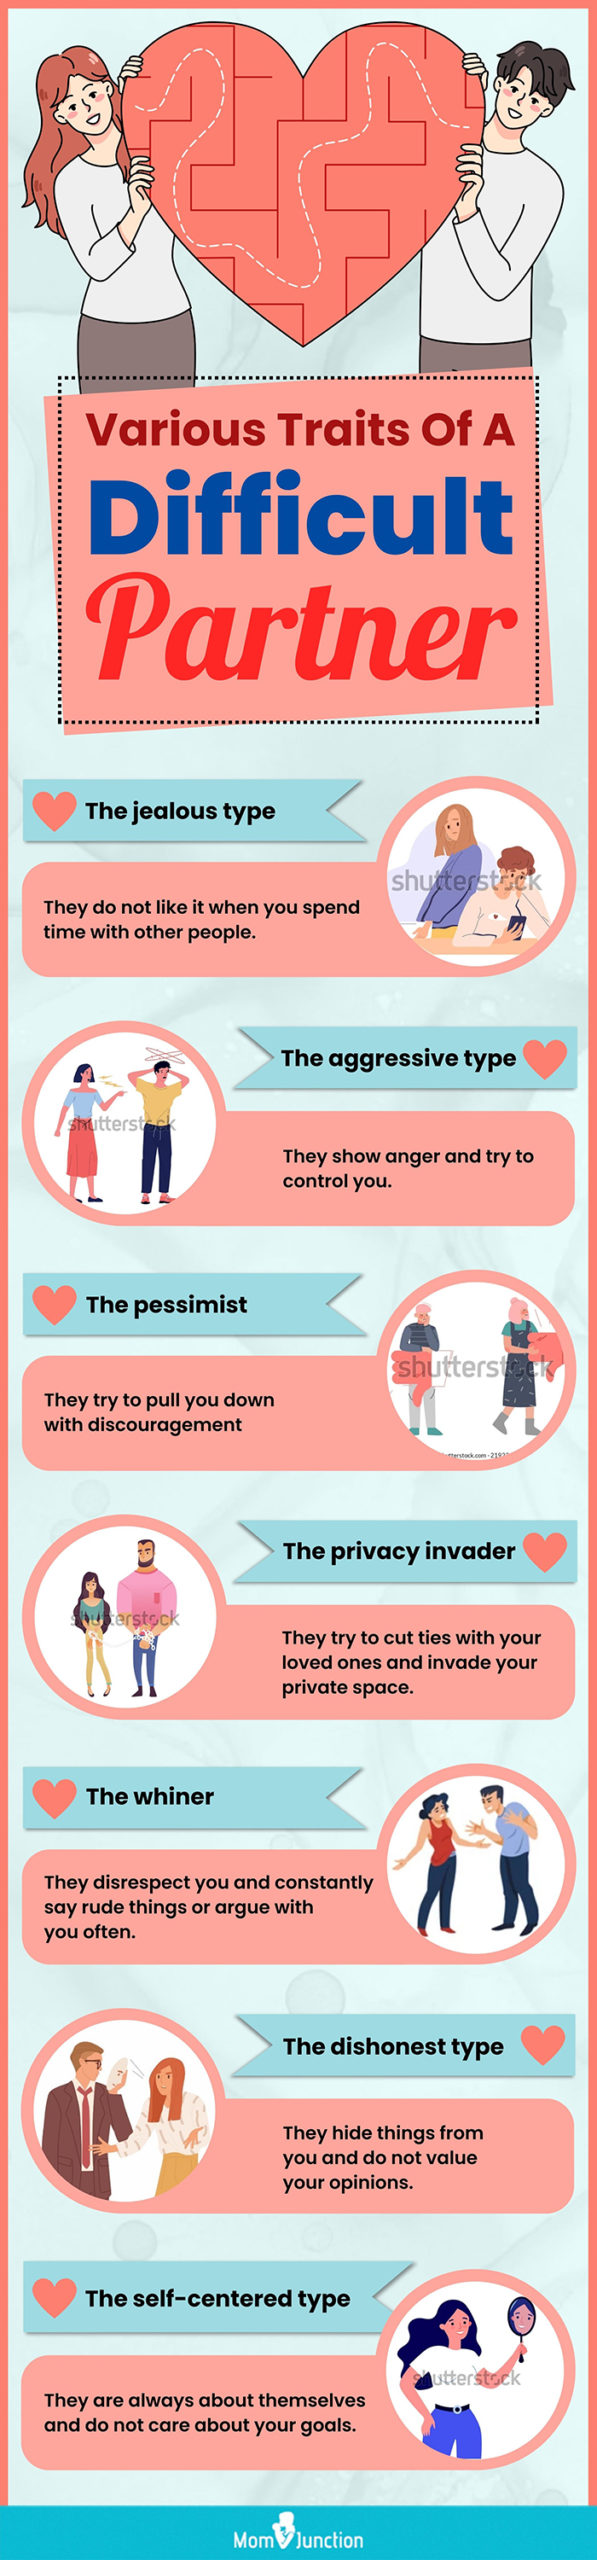 various traits of a difficult partner (infographic)